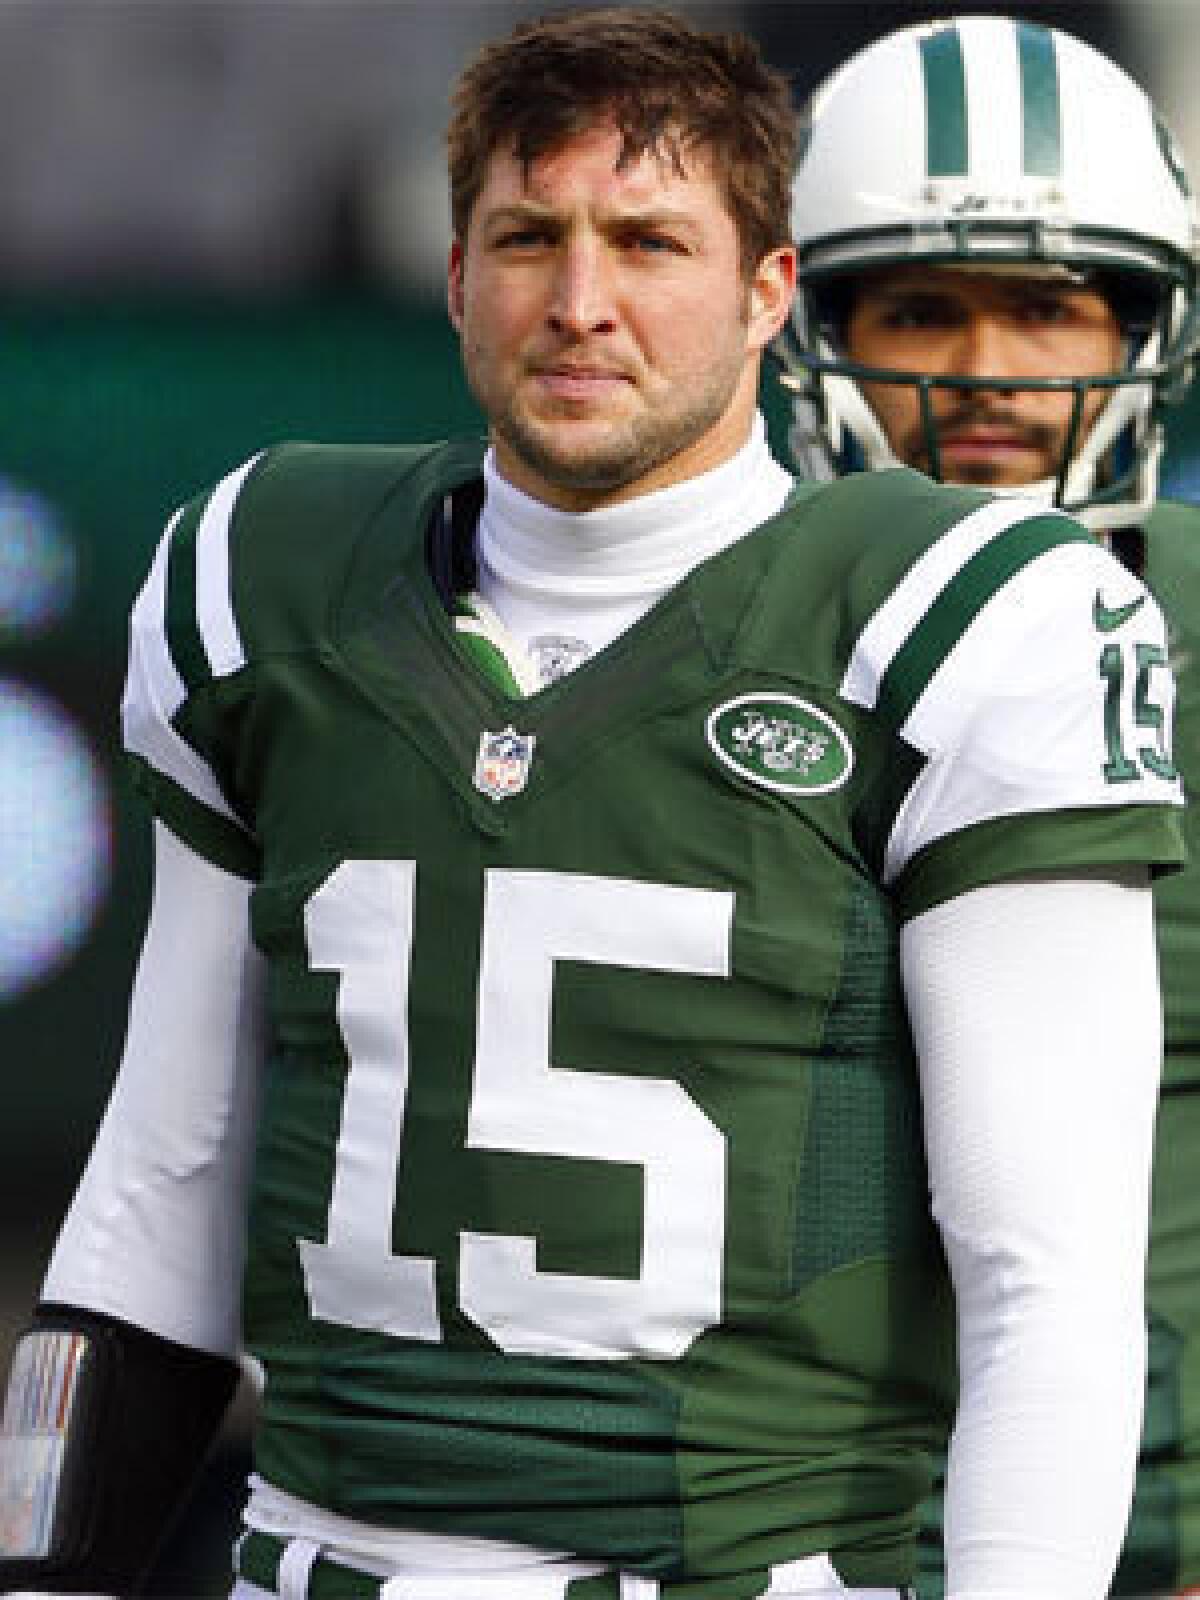 Tim Tebow didn't get a lot of playing time with the New York Jets this season, prompting speculation that he might be traded.